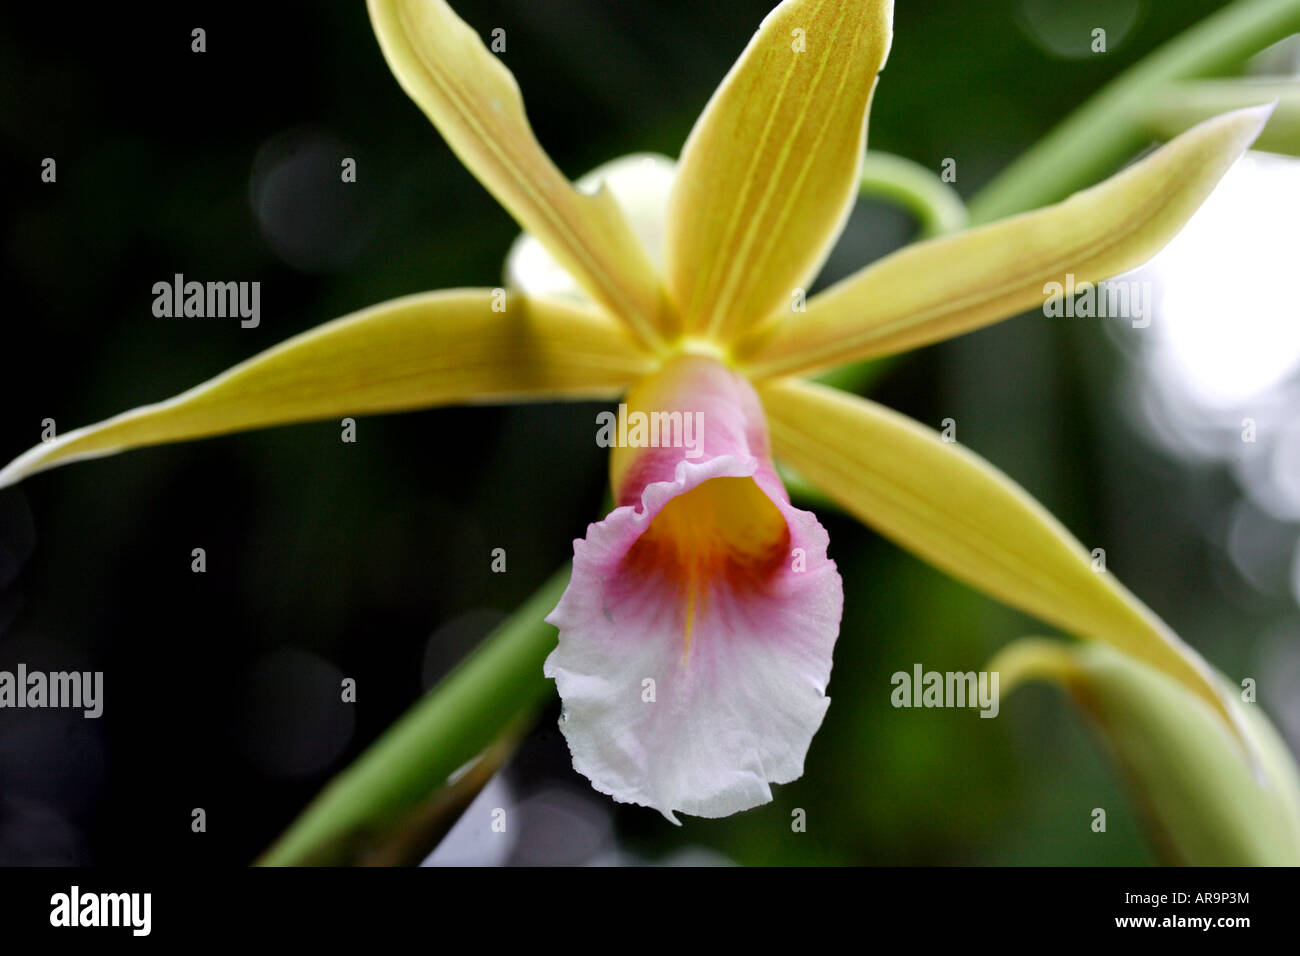 Close-up of a Phaius flower Stock Photo